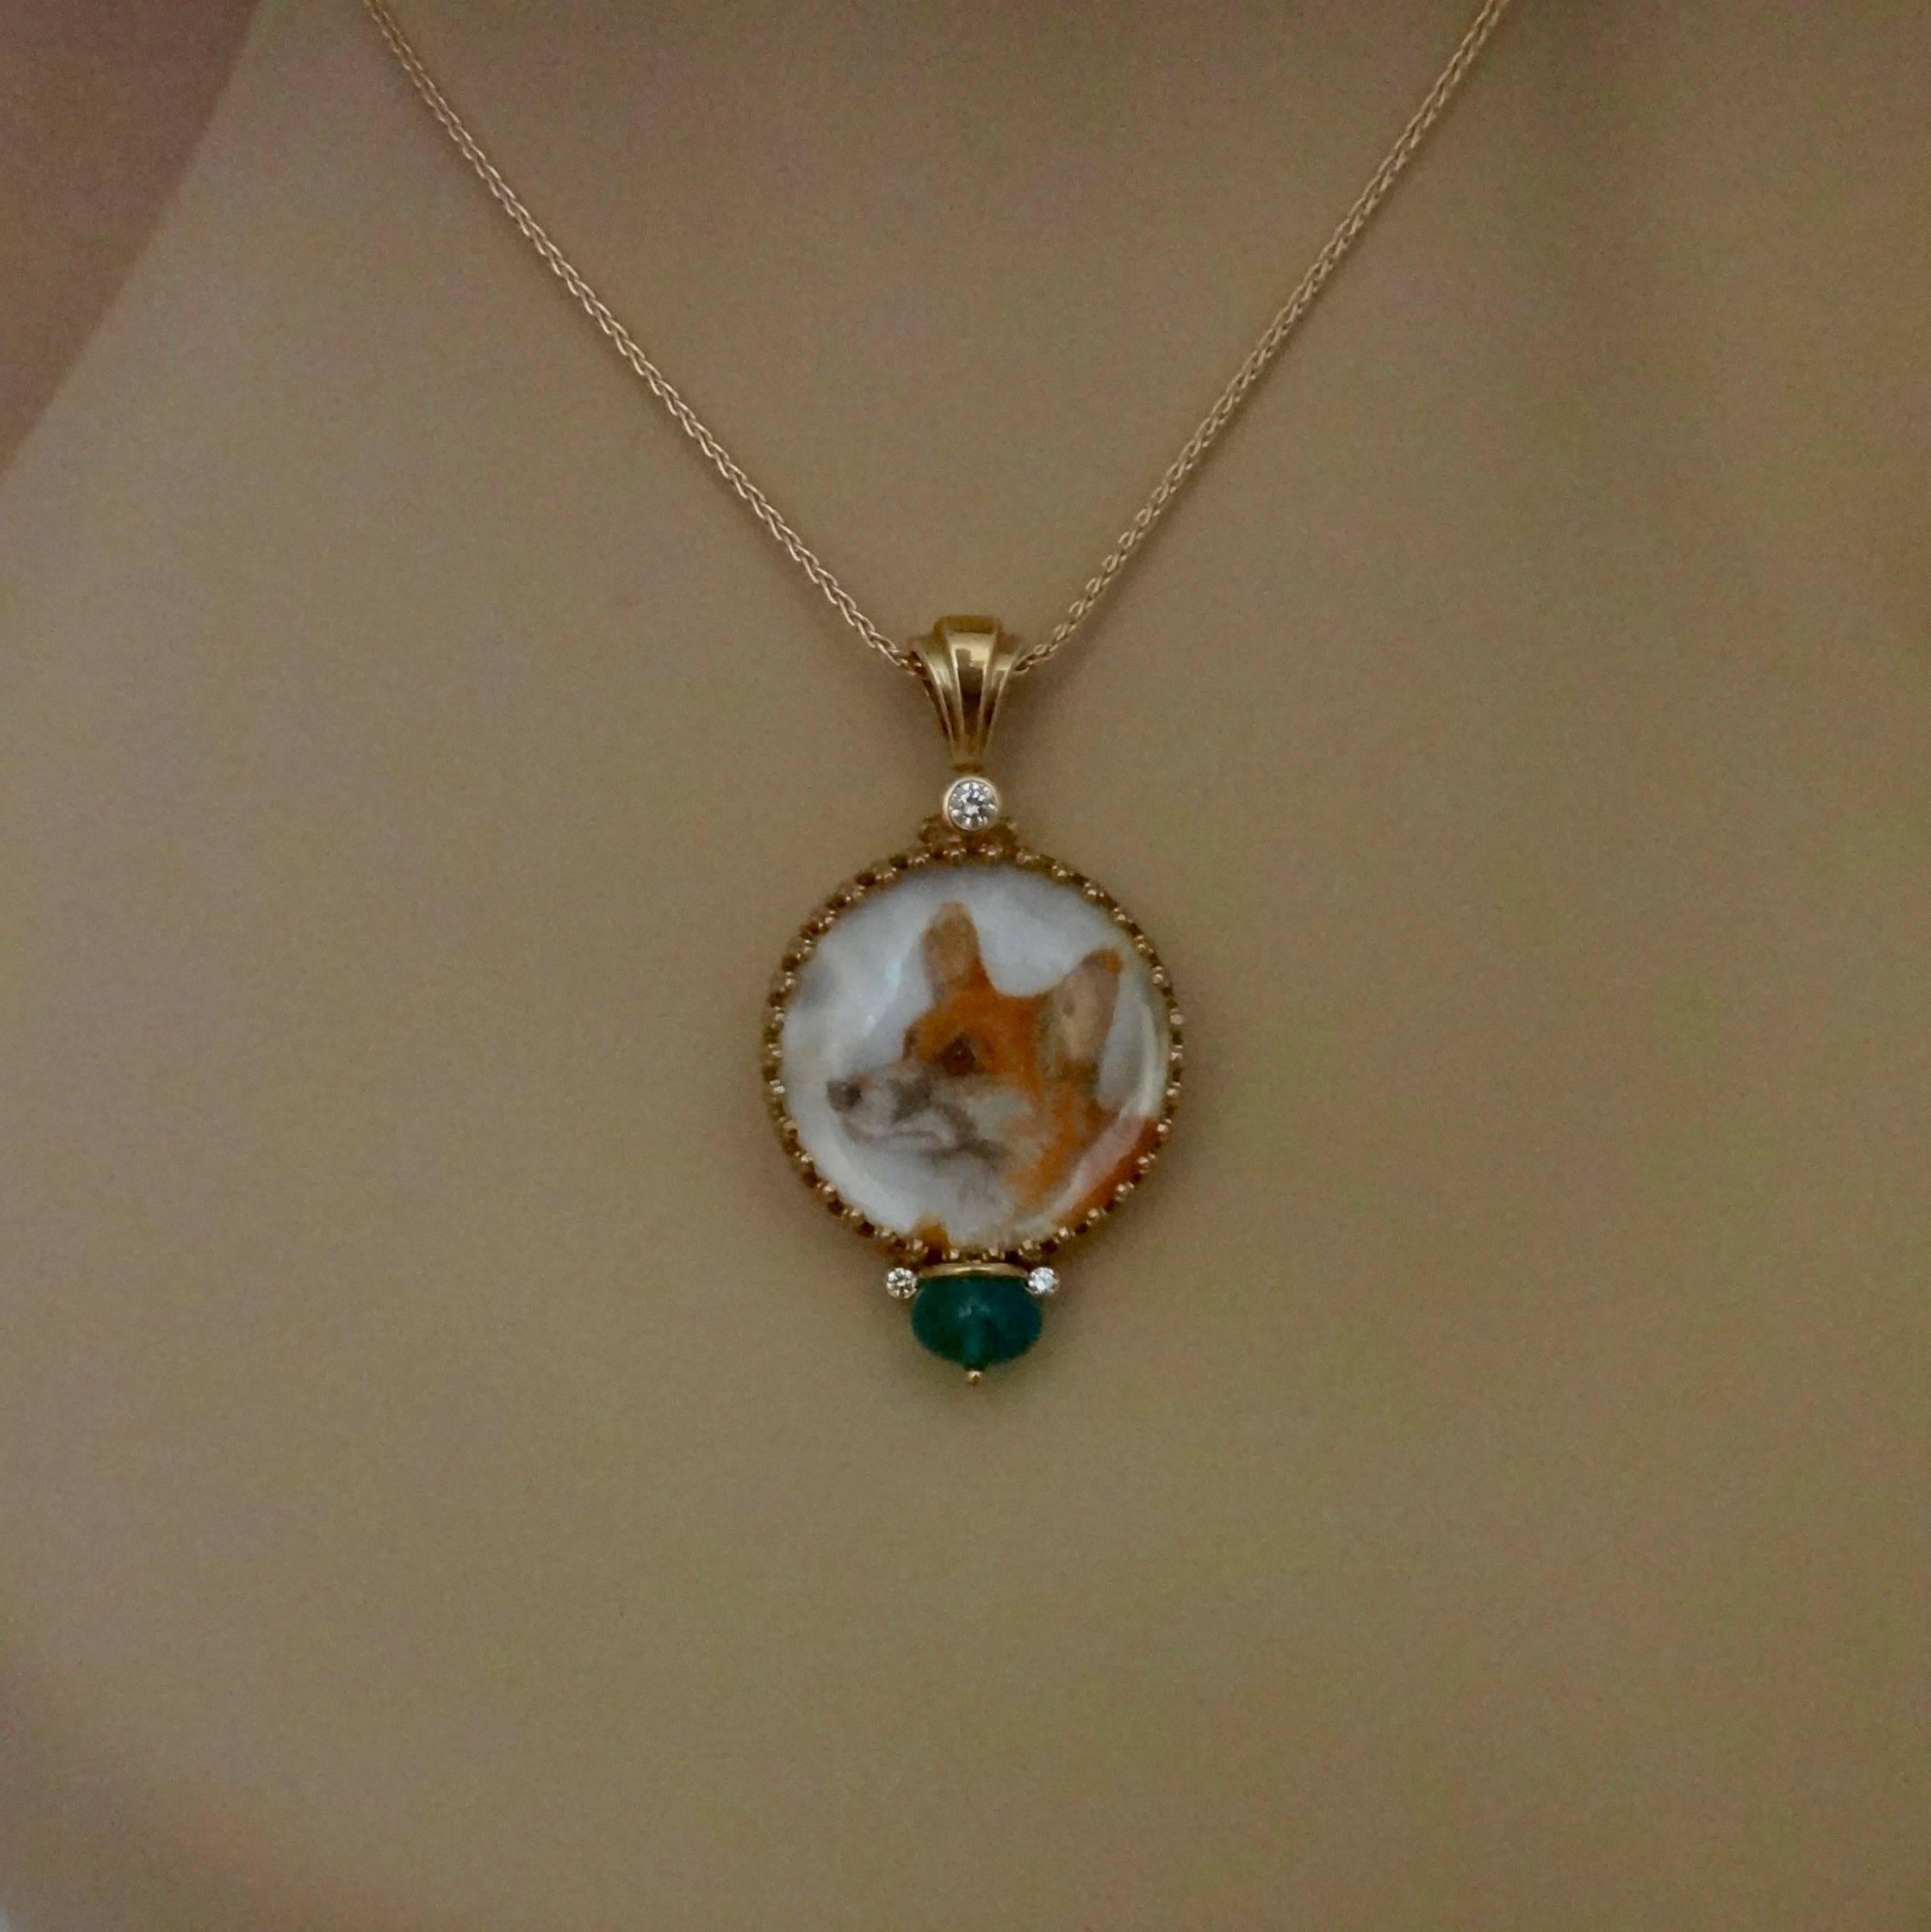 A miniature oil painting of a Welsh Corgi is featured in this one-of-a-kind portrait pendant.  The oil on mother-of-pearl is painted by artist Georgina Love.  The painting is covered by a rock crystal lenses, is set in a filigree gold frame and